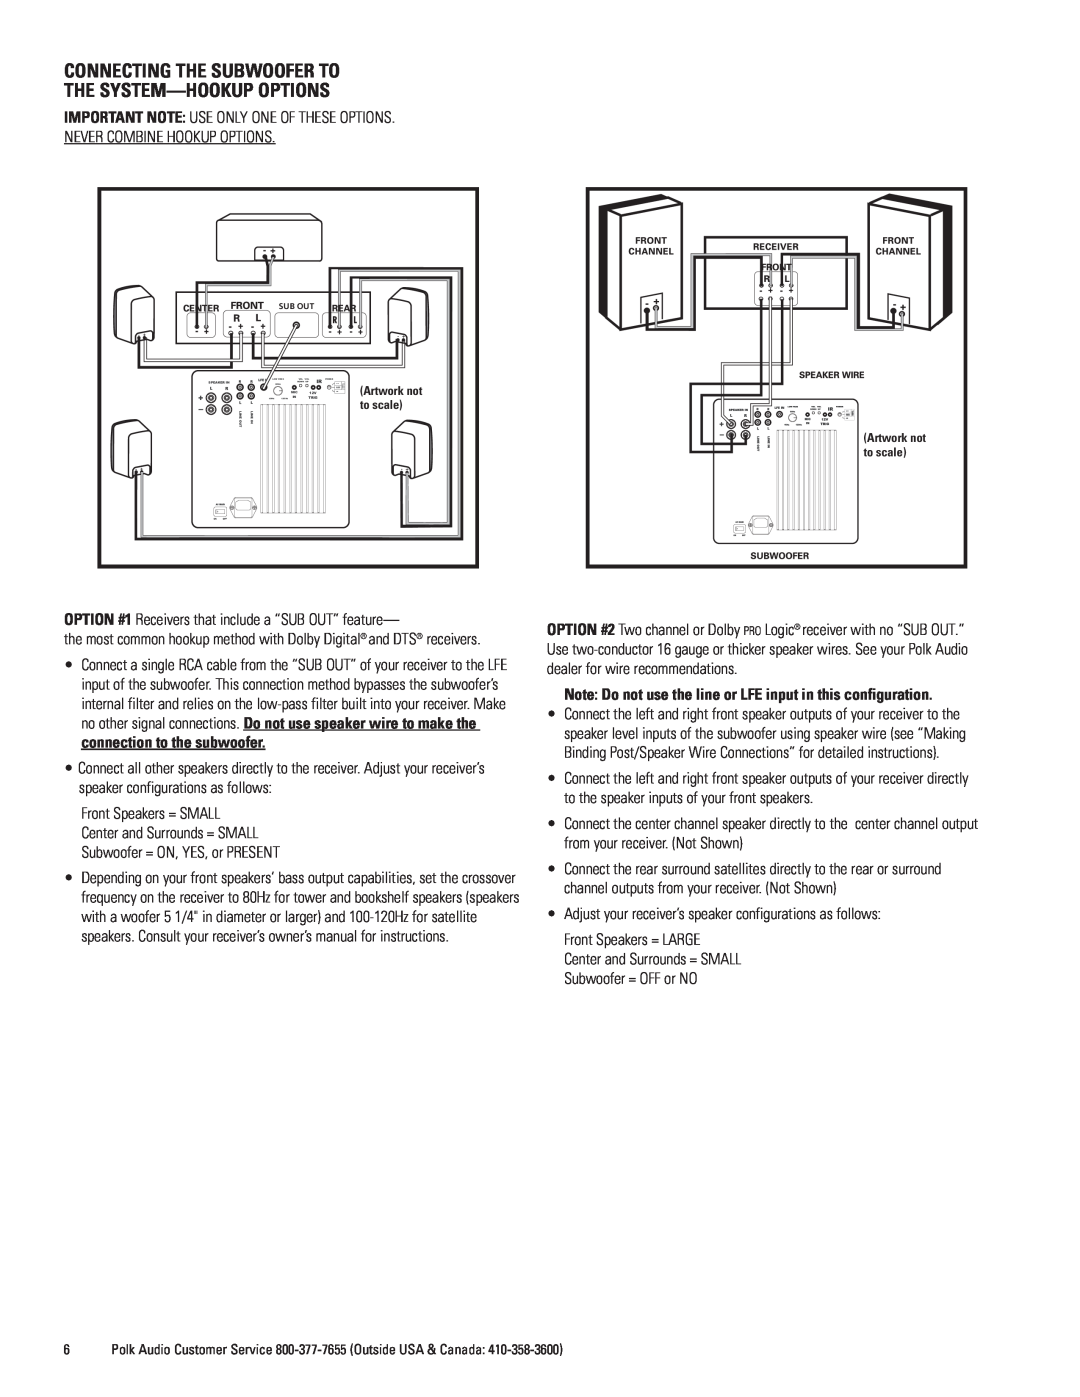 Polk Audio DSWmicroPRO1000 owner manual Connecting The Subwoofer To, The System-Hookupoptions 